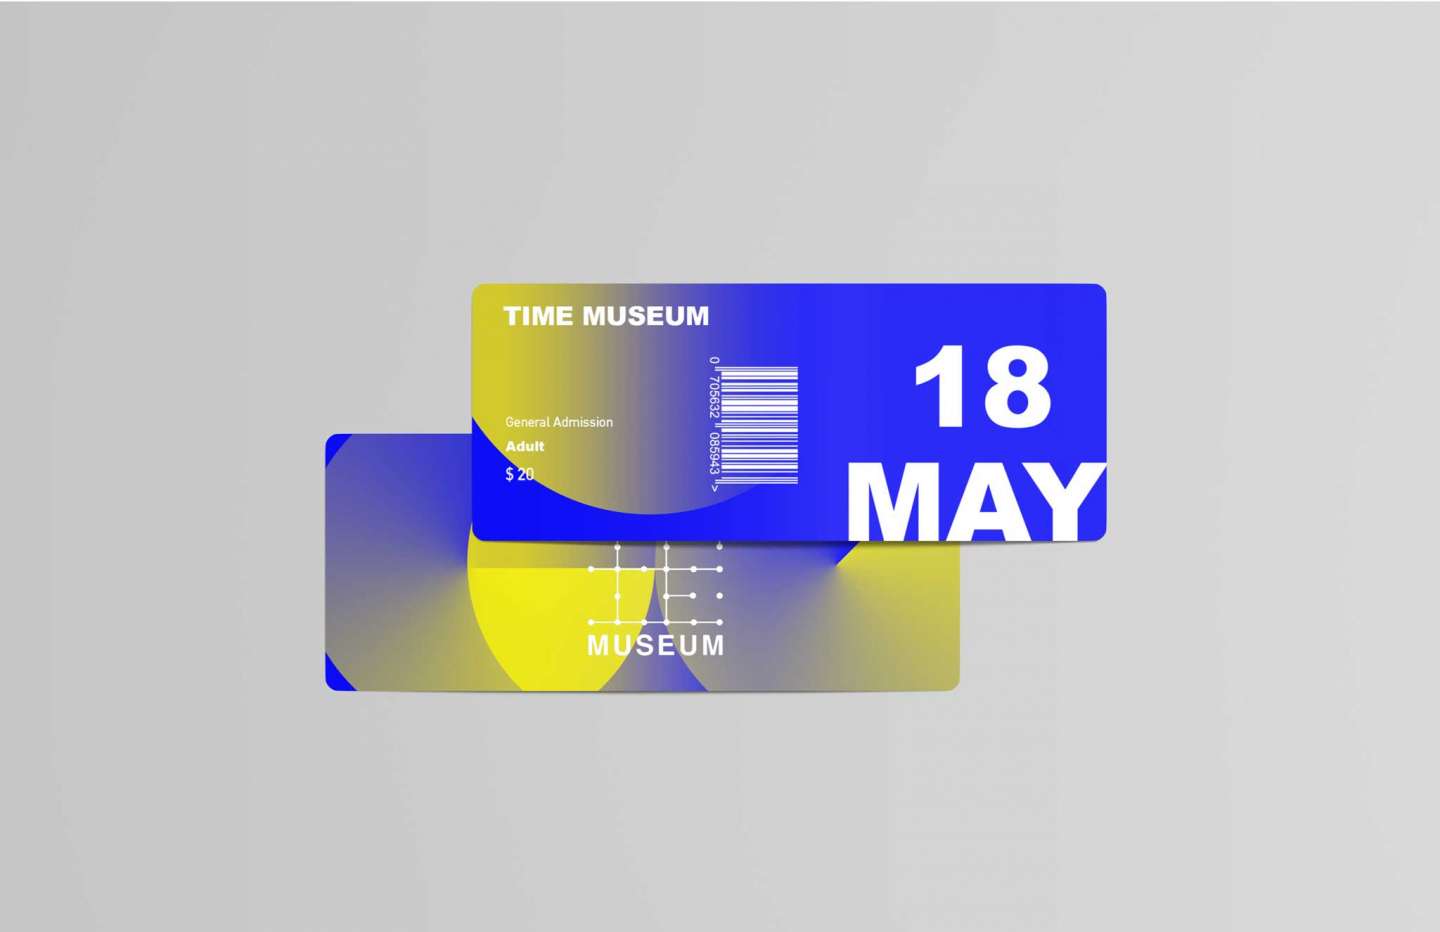 TIME MUSEUM 